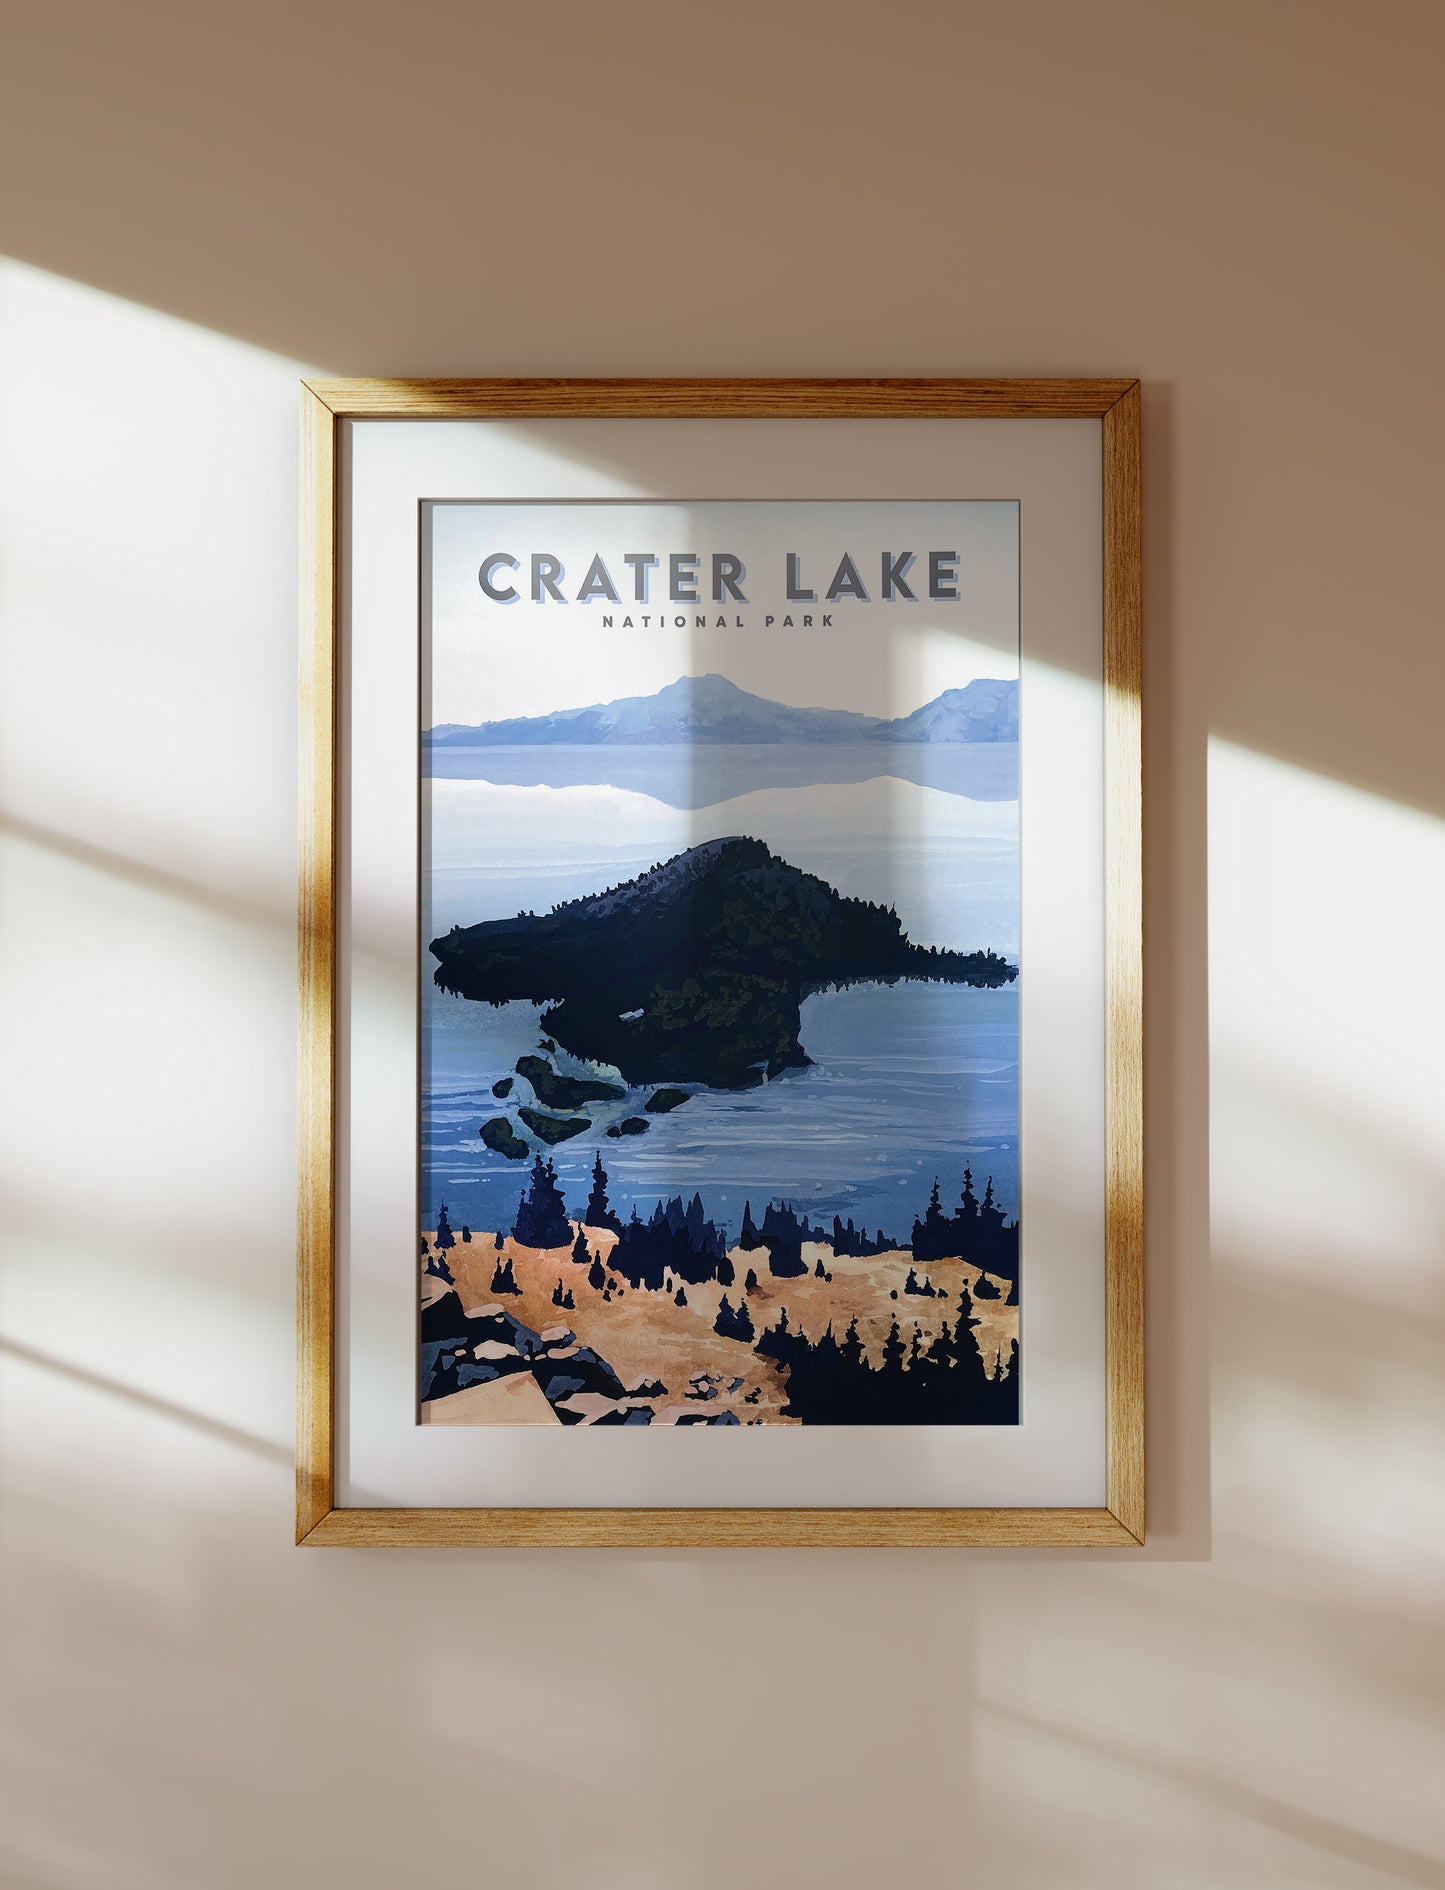 'Crater Lake' National Park Travel Poster